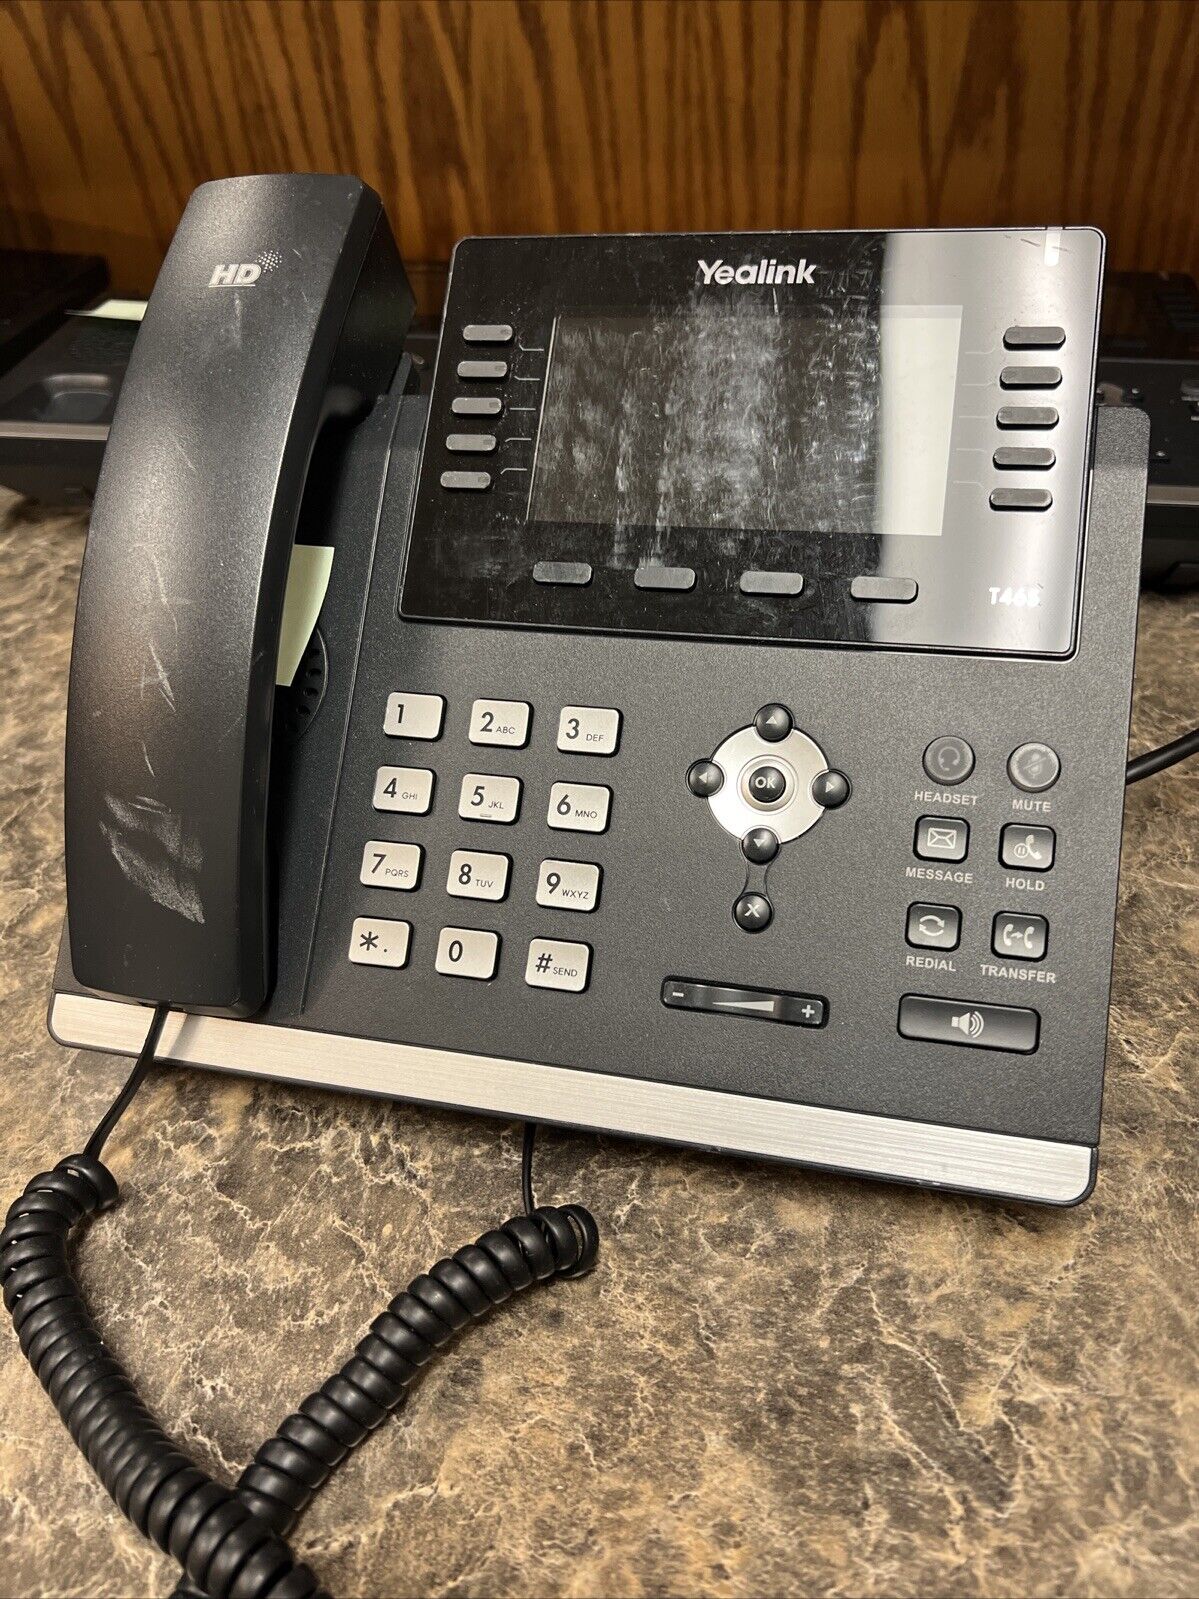 Yealink SIP-T46S IP Phone - 16 Units Scratched During Shipping